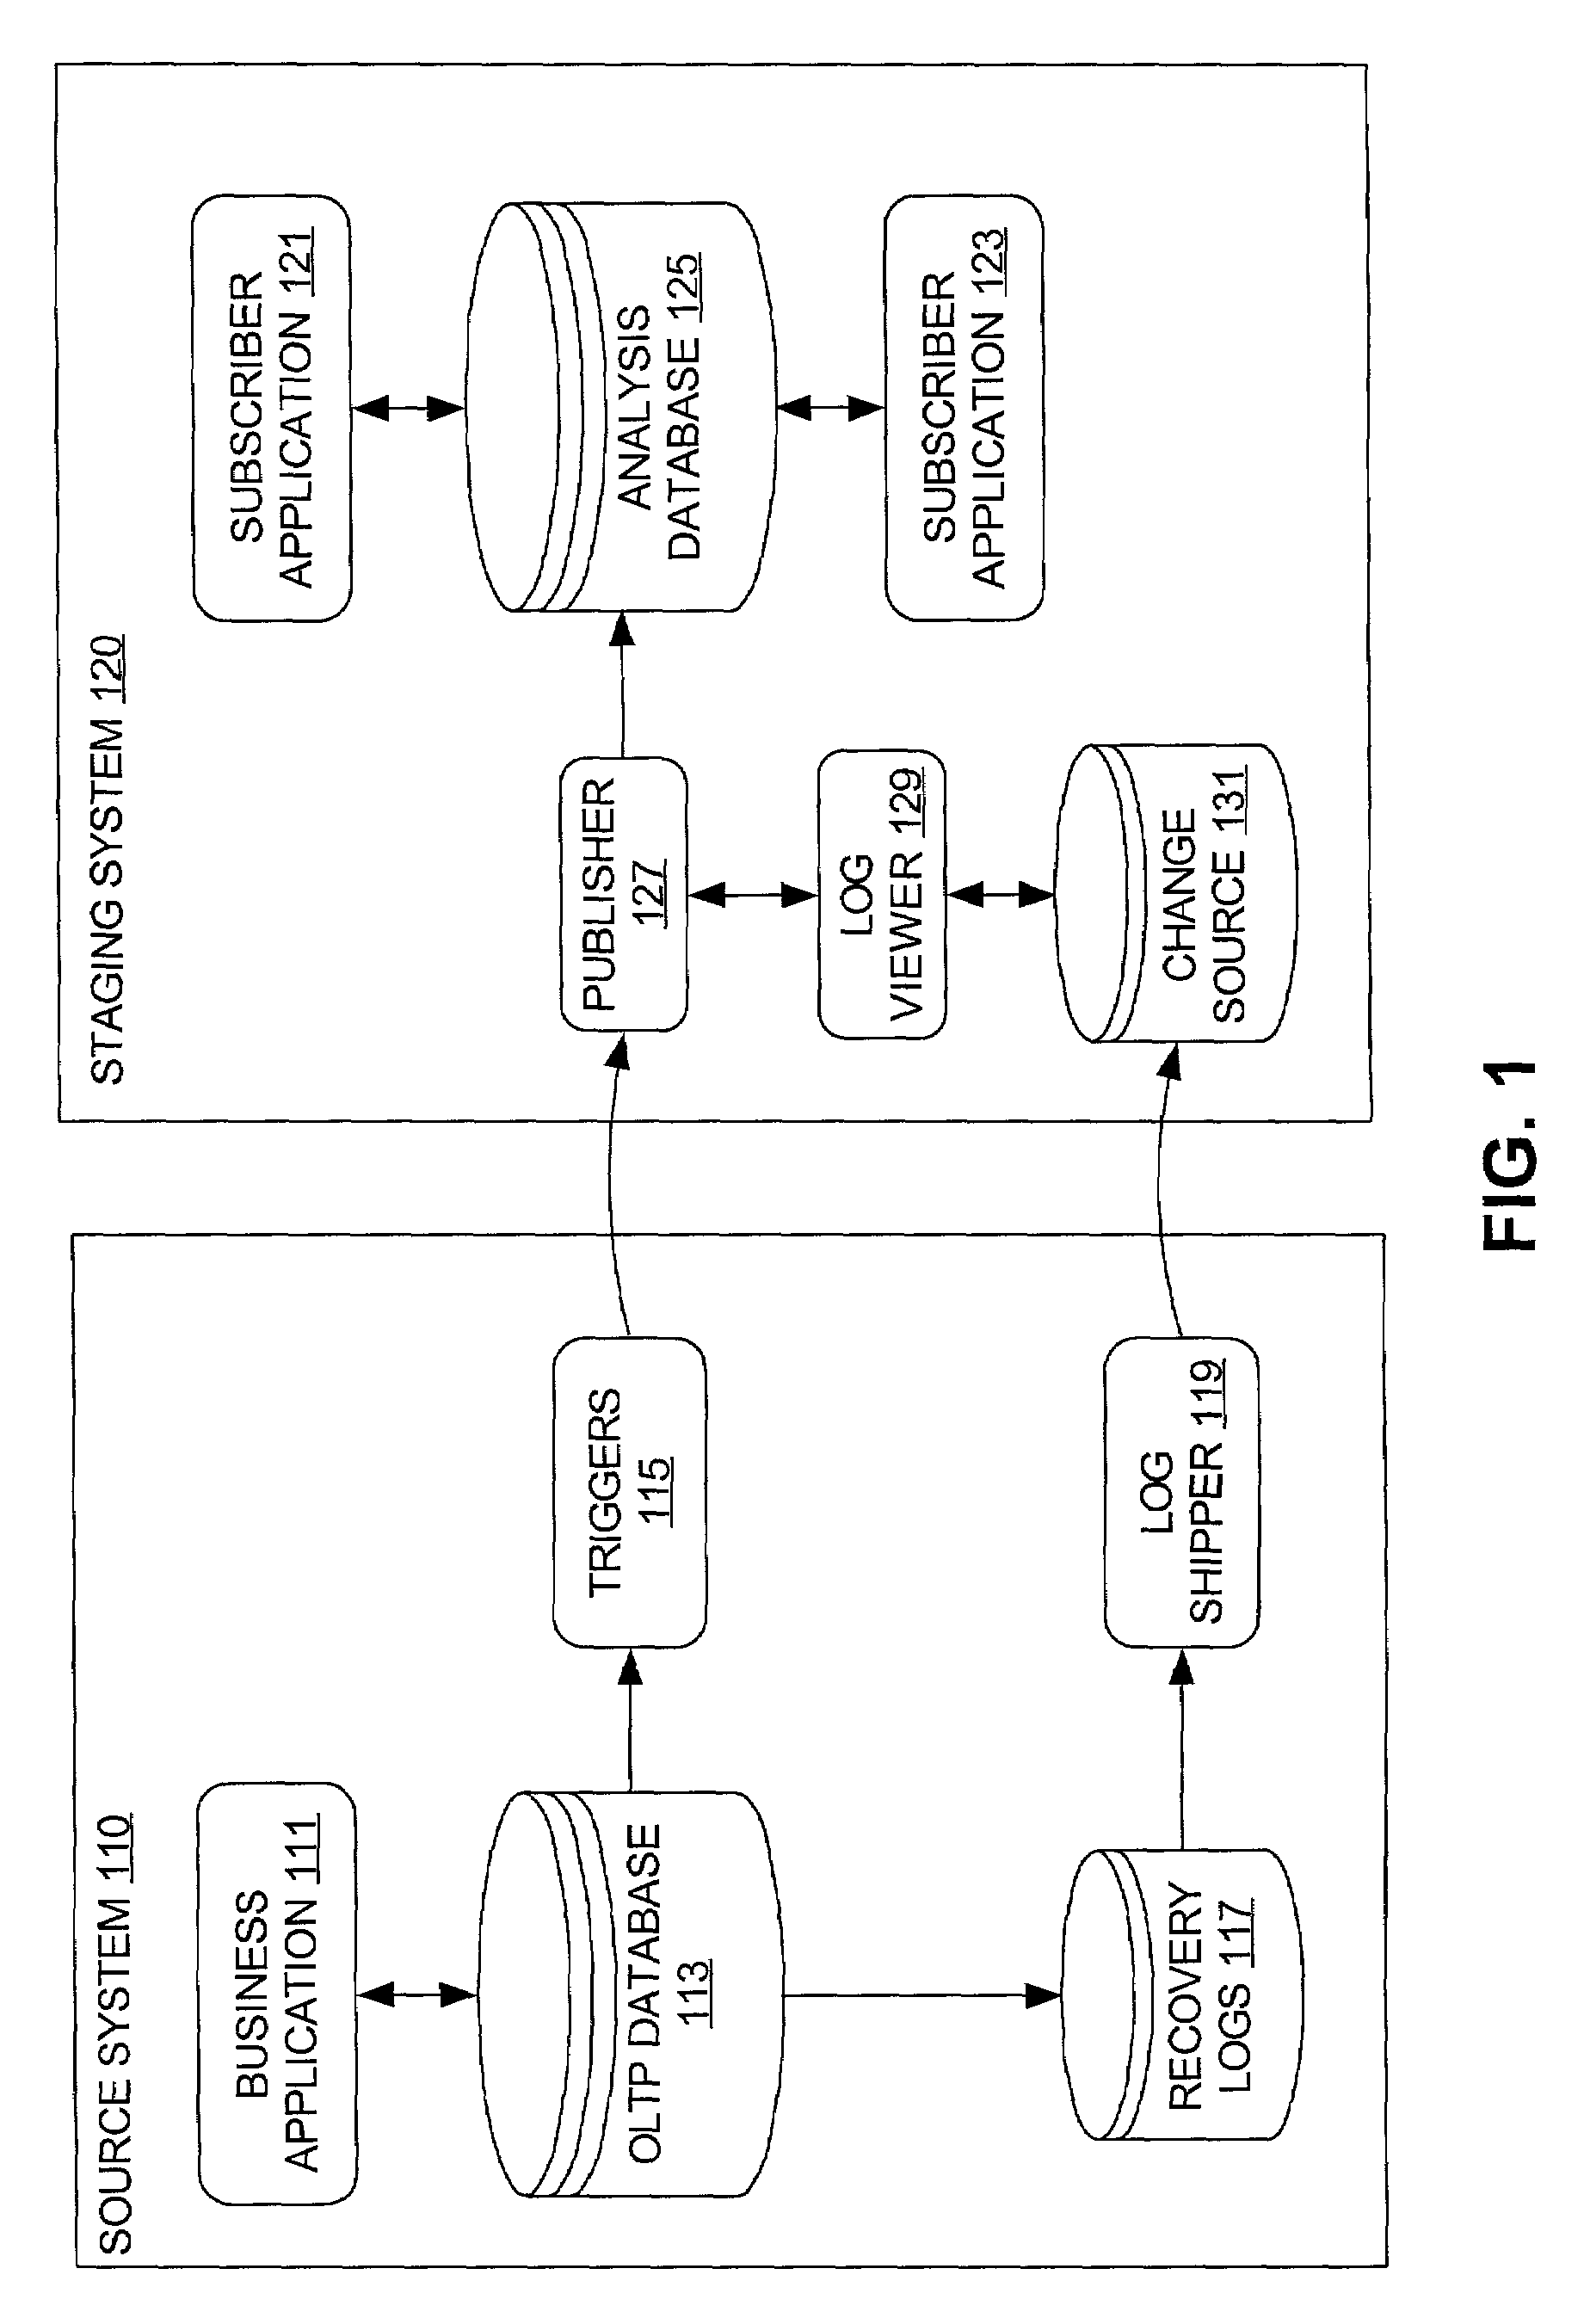 Synchronous change data capture in a relational database